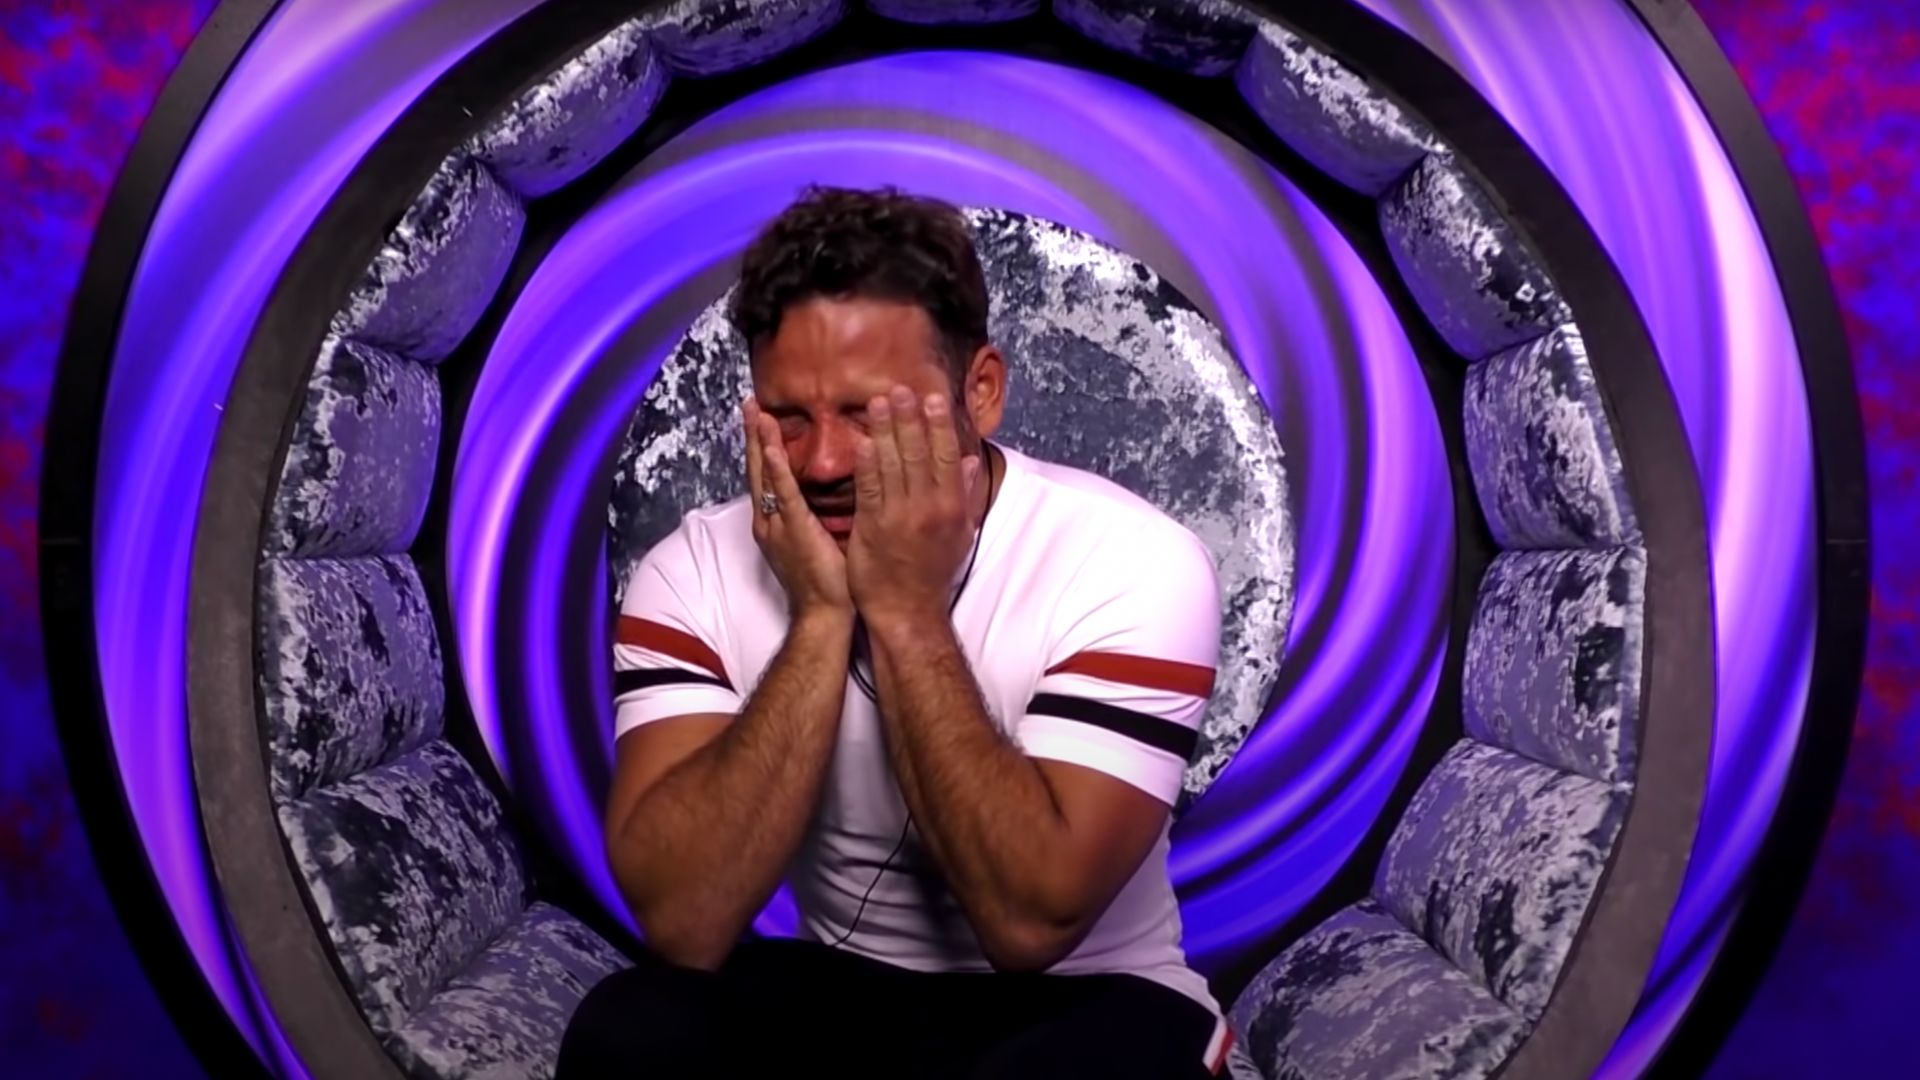 Ryan Thomas was devastated by the accusations